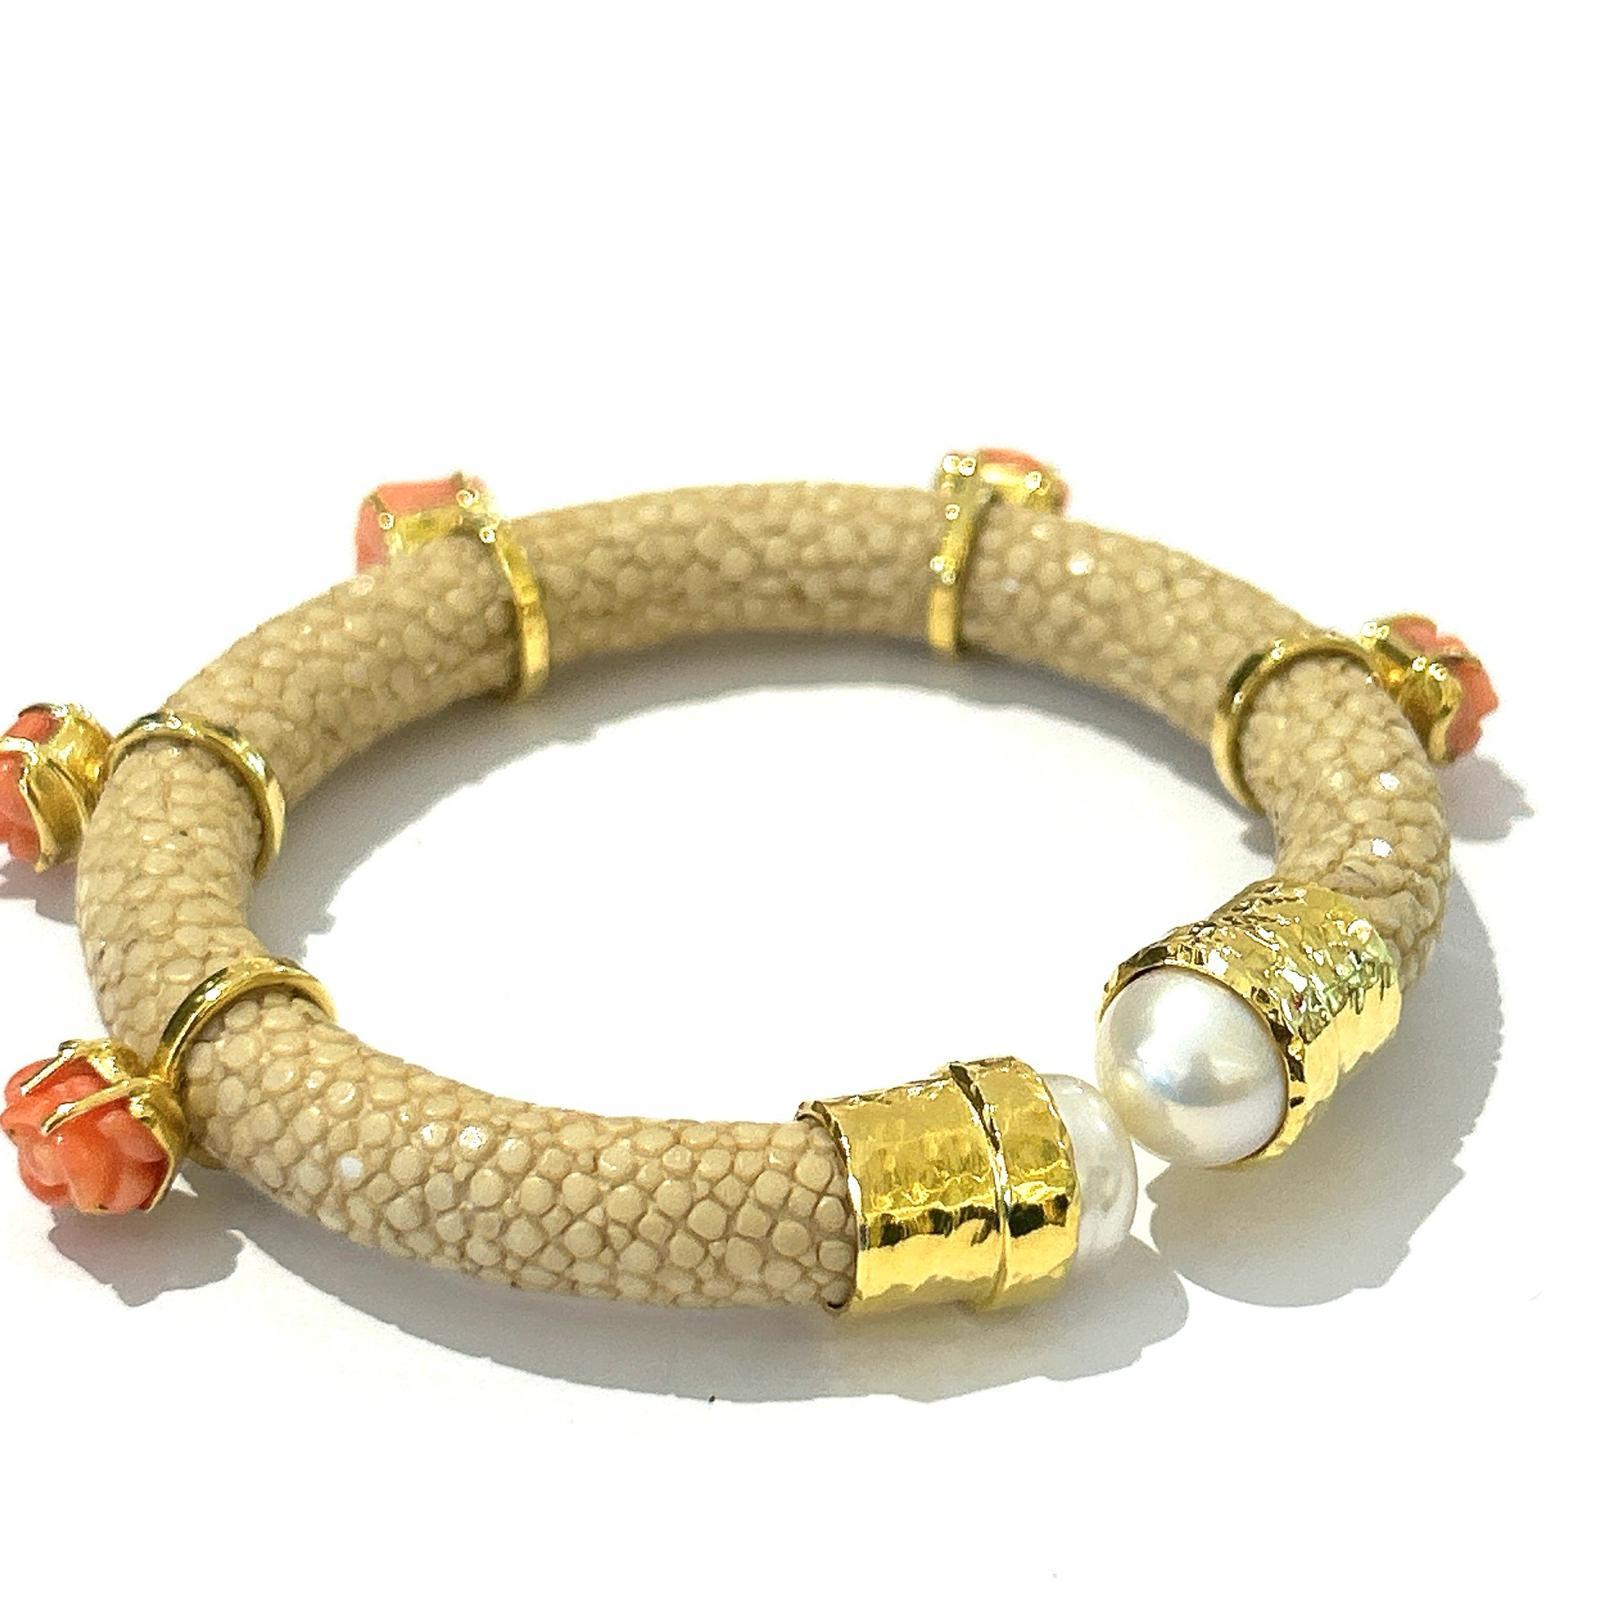 Bochic “Capri” String Ray & Flower Coral Bangle Set In 18K Gold & Silver  In New Condition For Sale In New York, NY